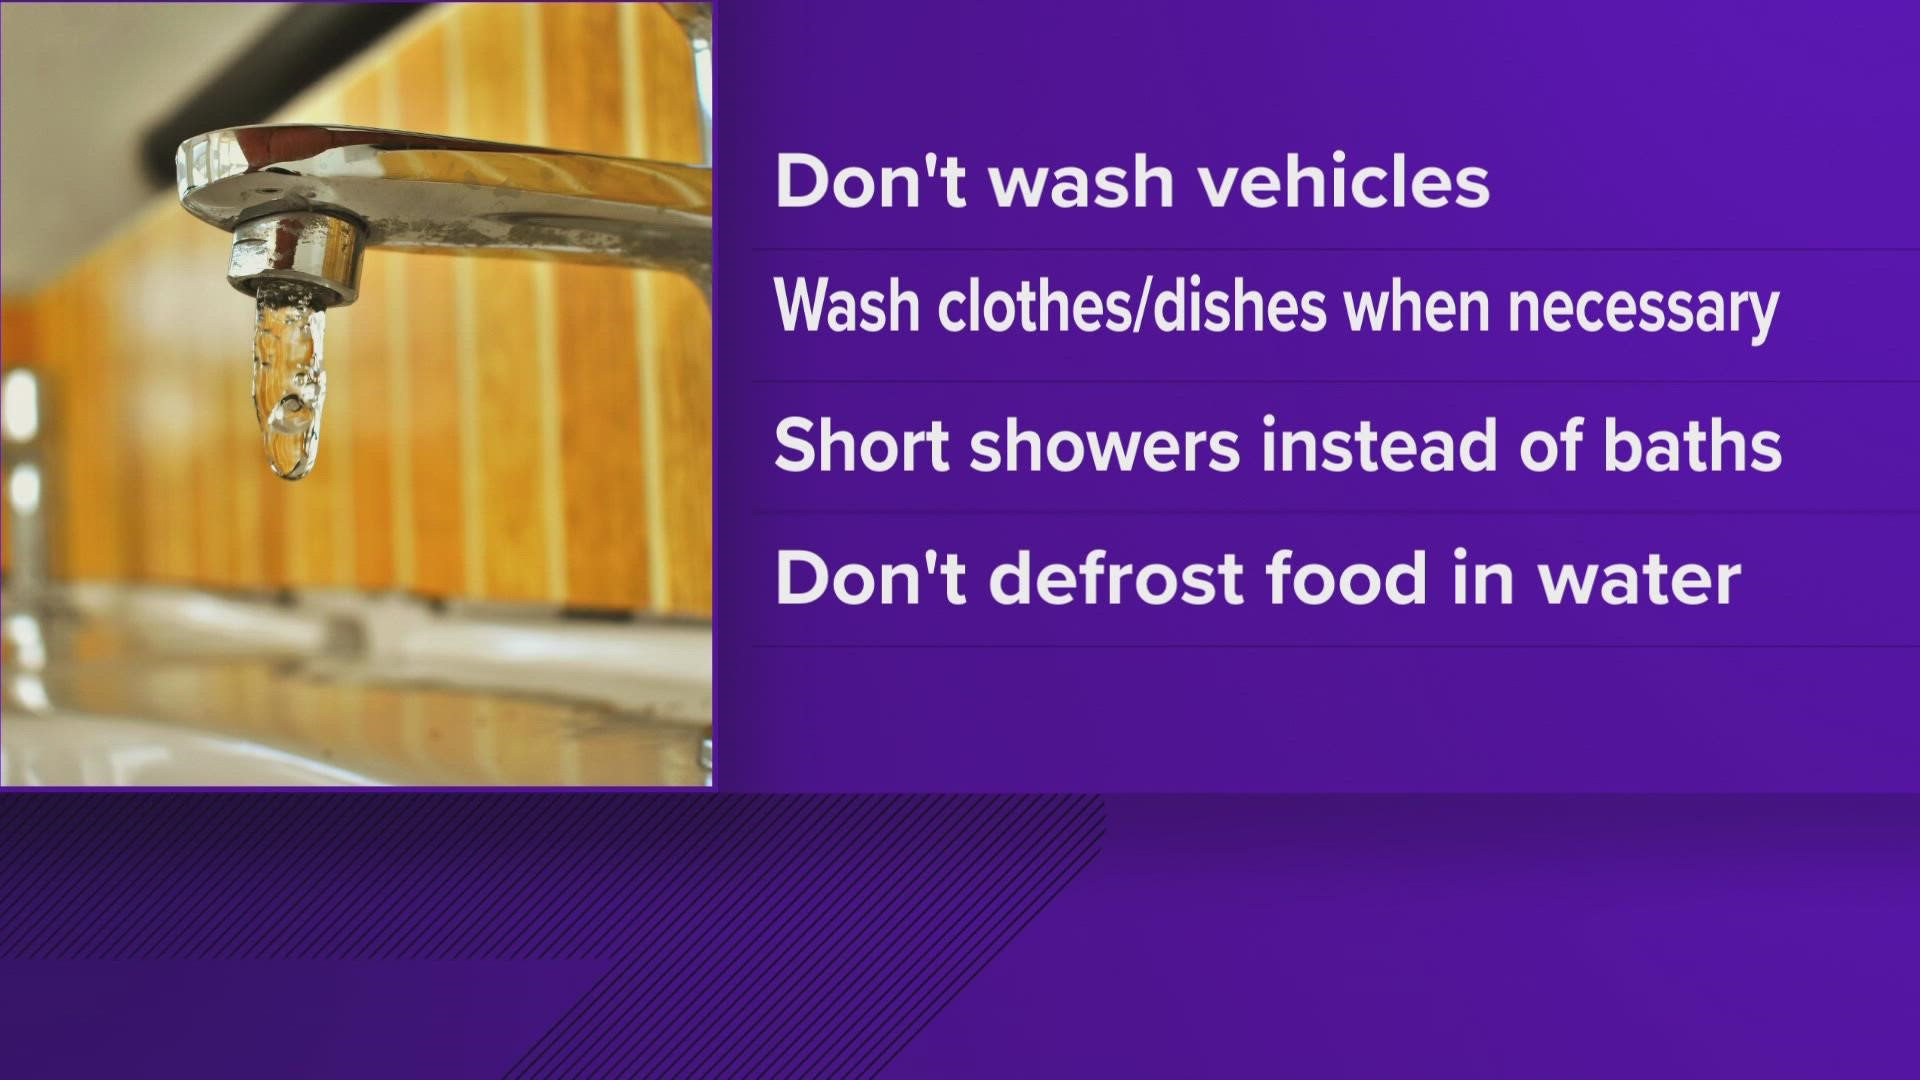 MLGW said residents should not wash their cars, clothes or dishes until further notice.